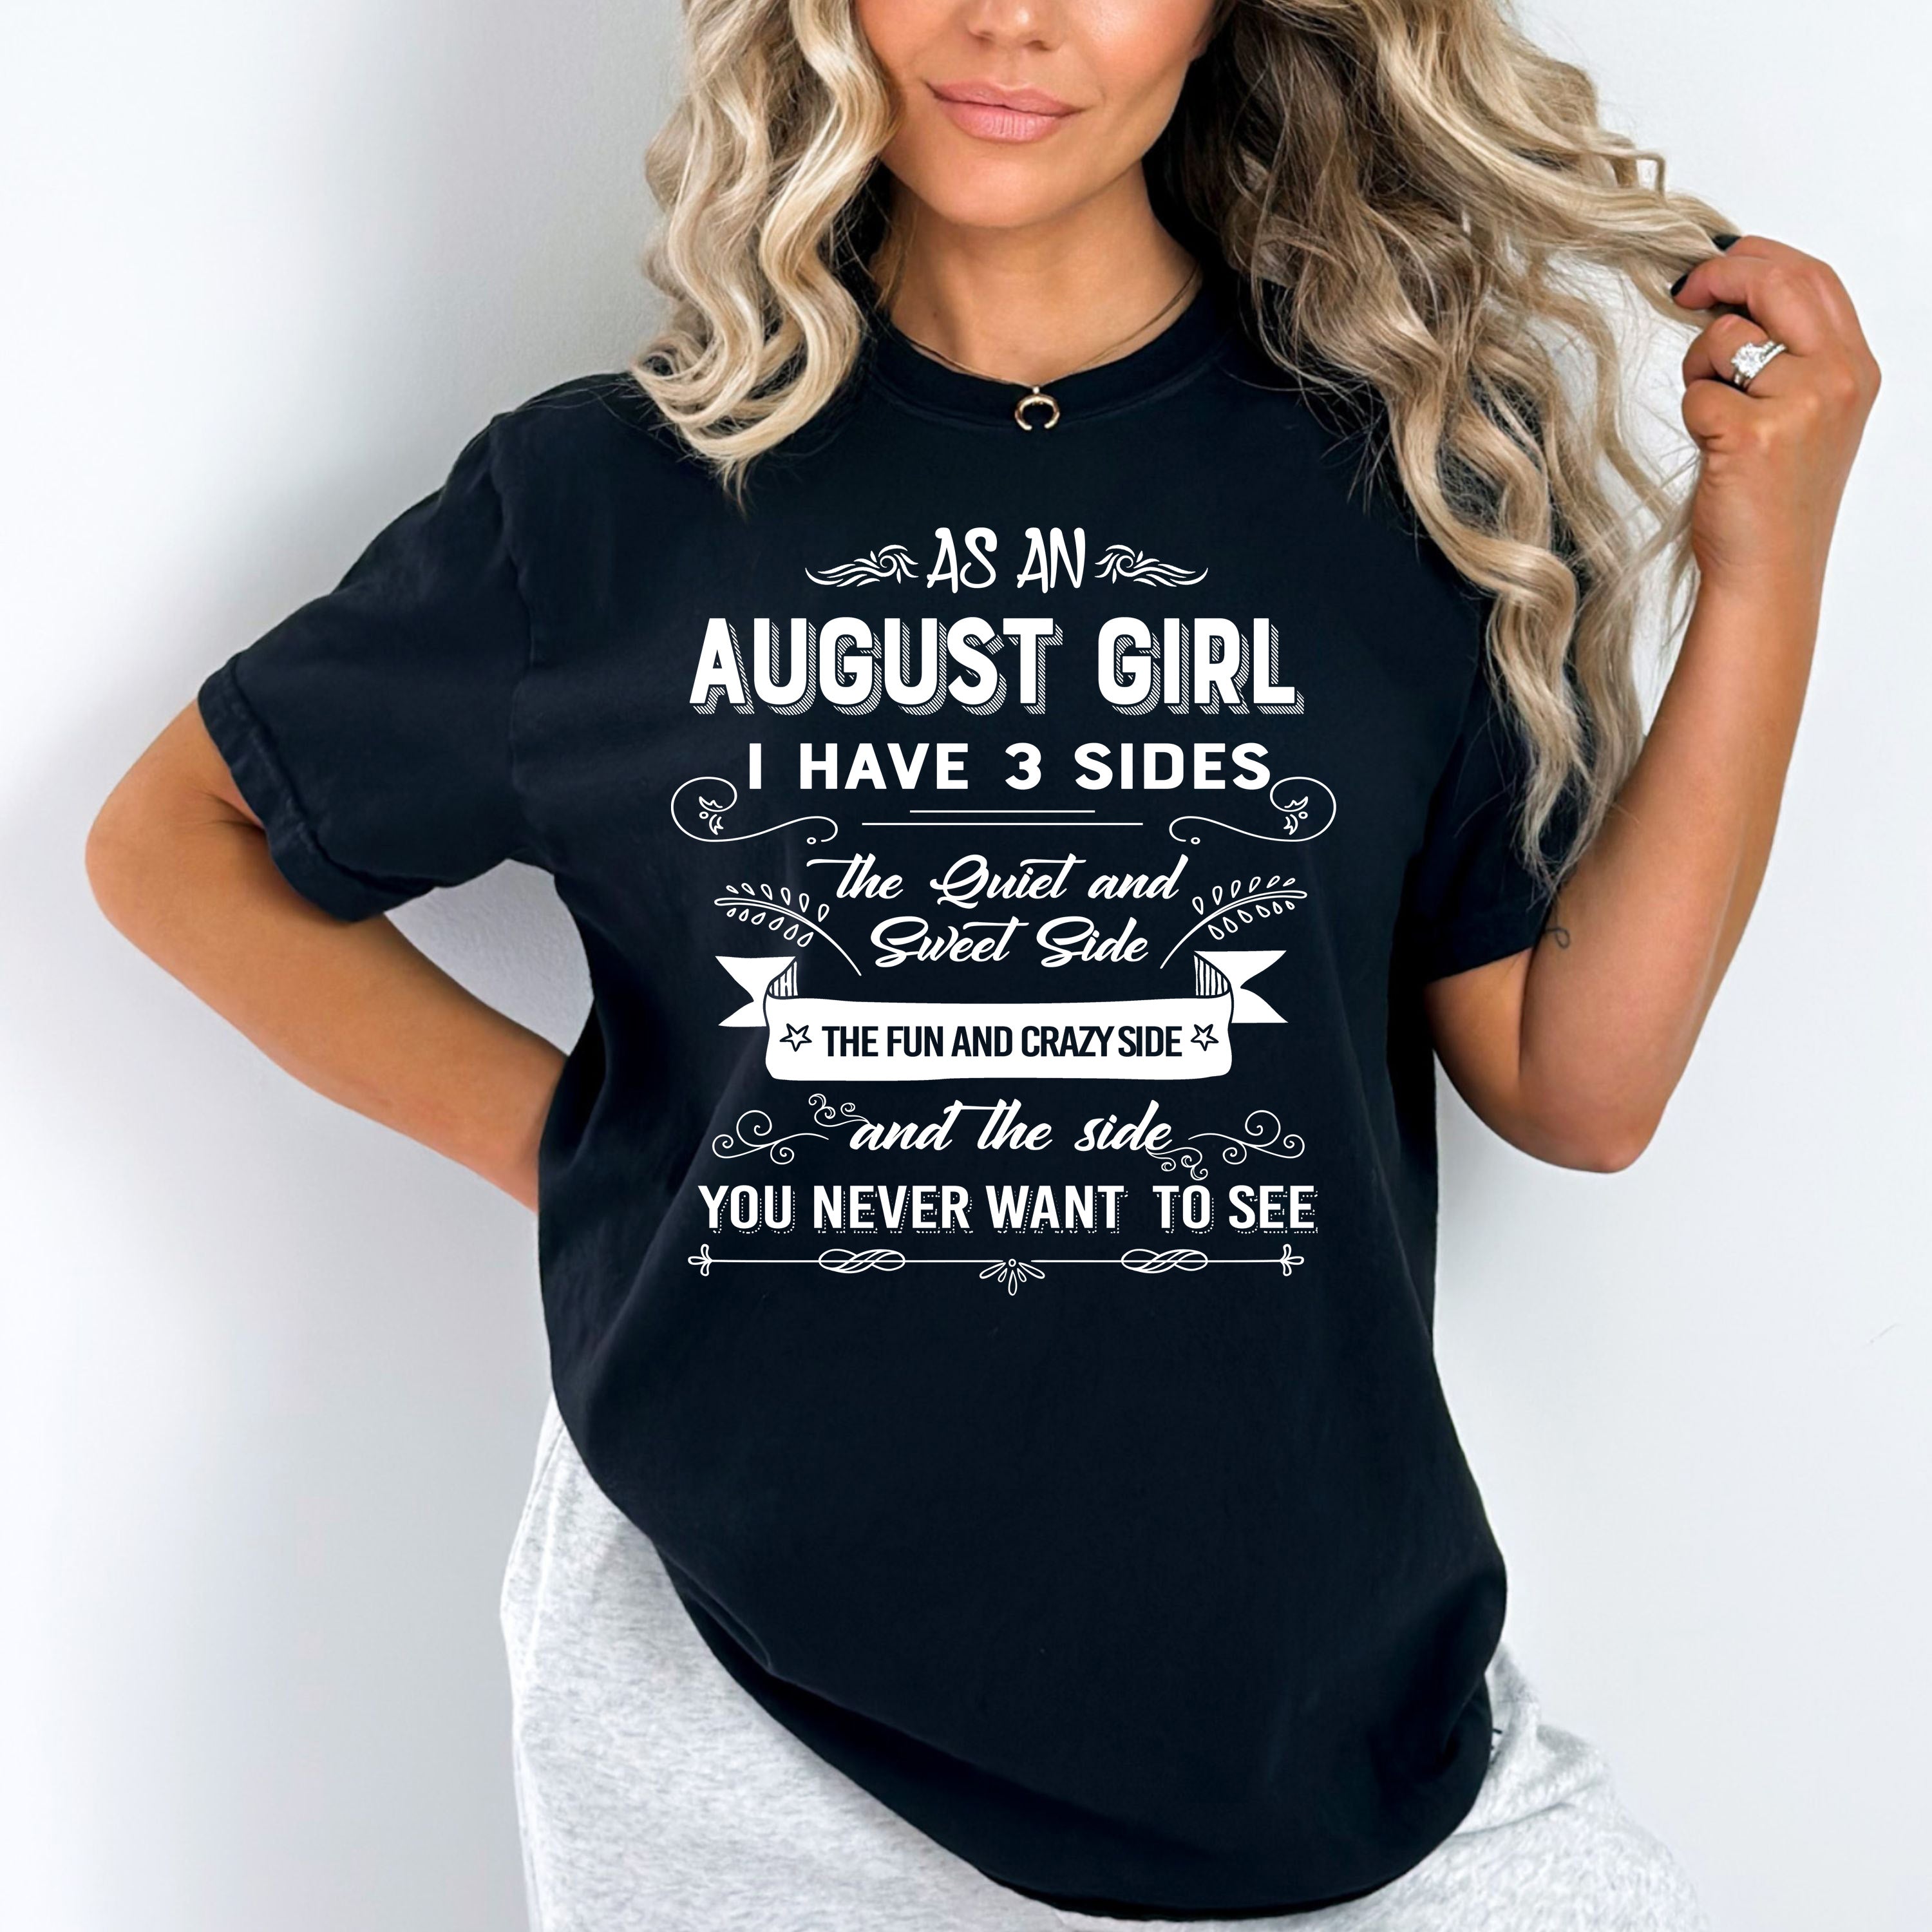 "As an August Girl I have 3 Sides" Buy all colors. Save Shipping.